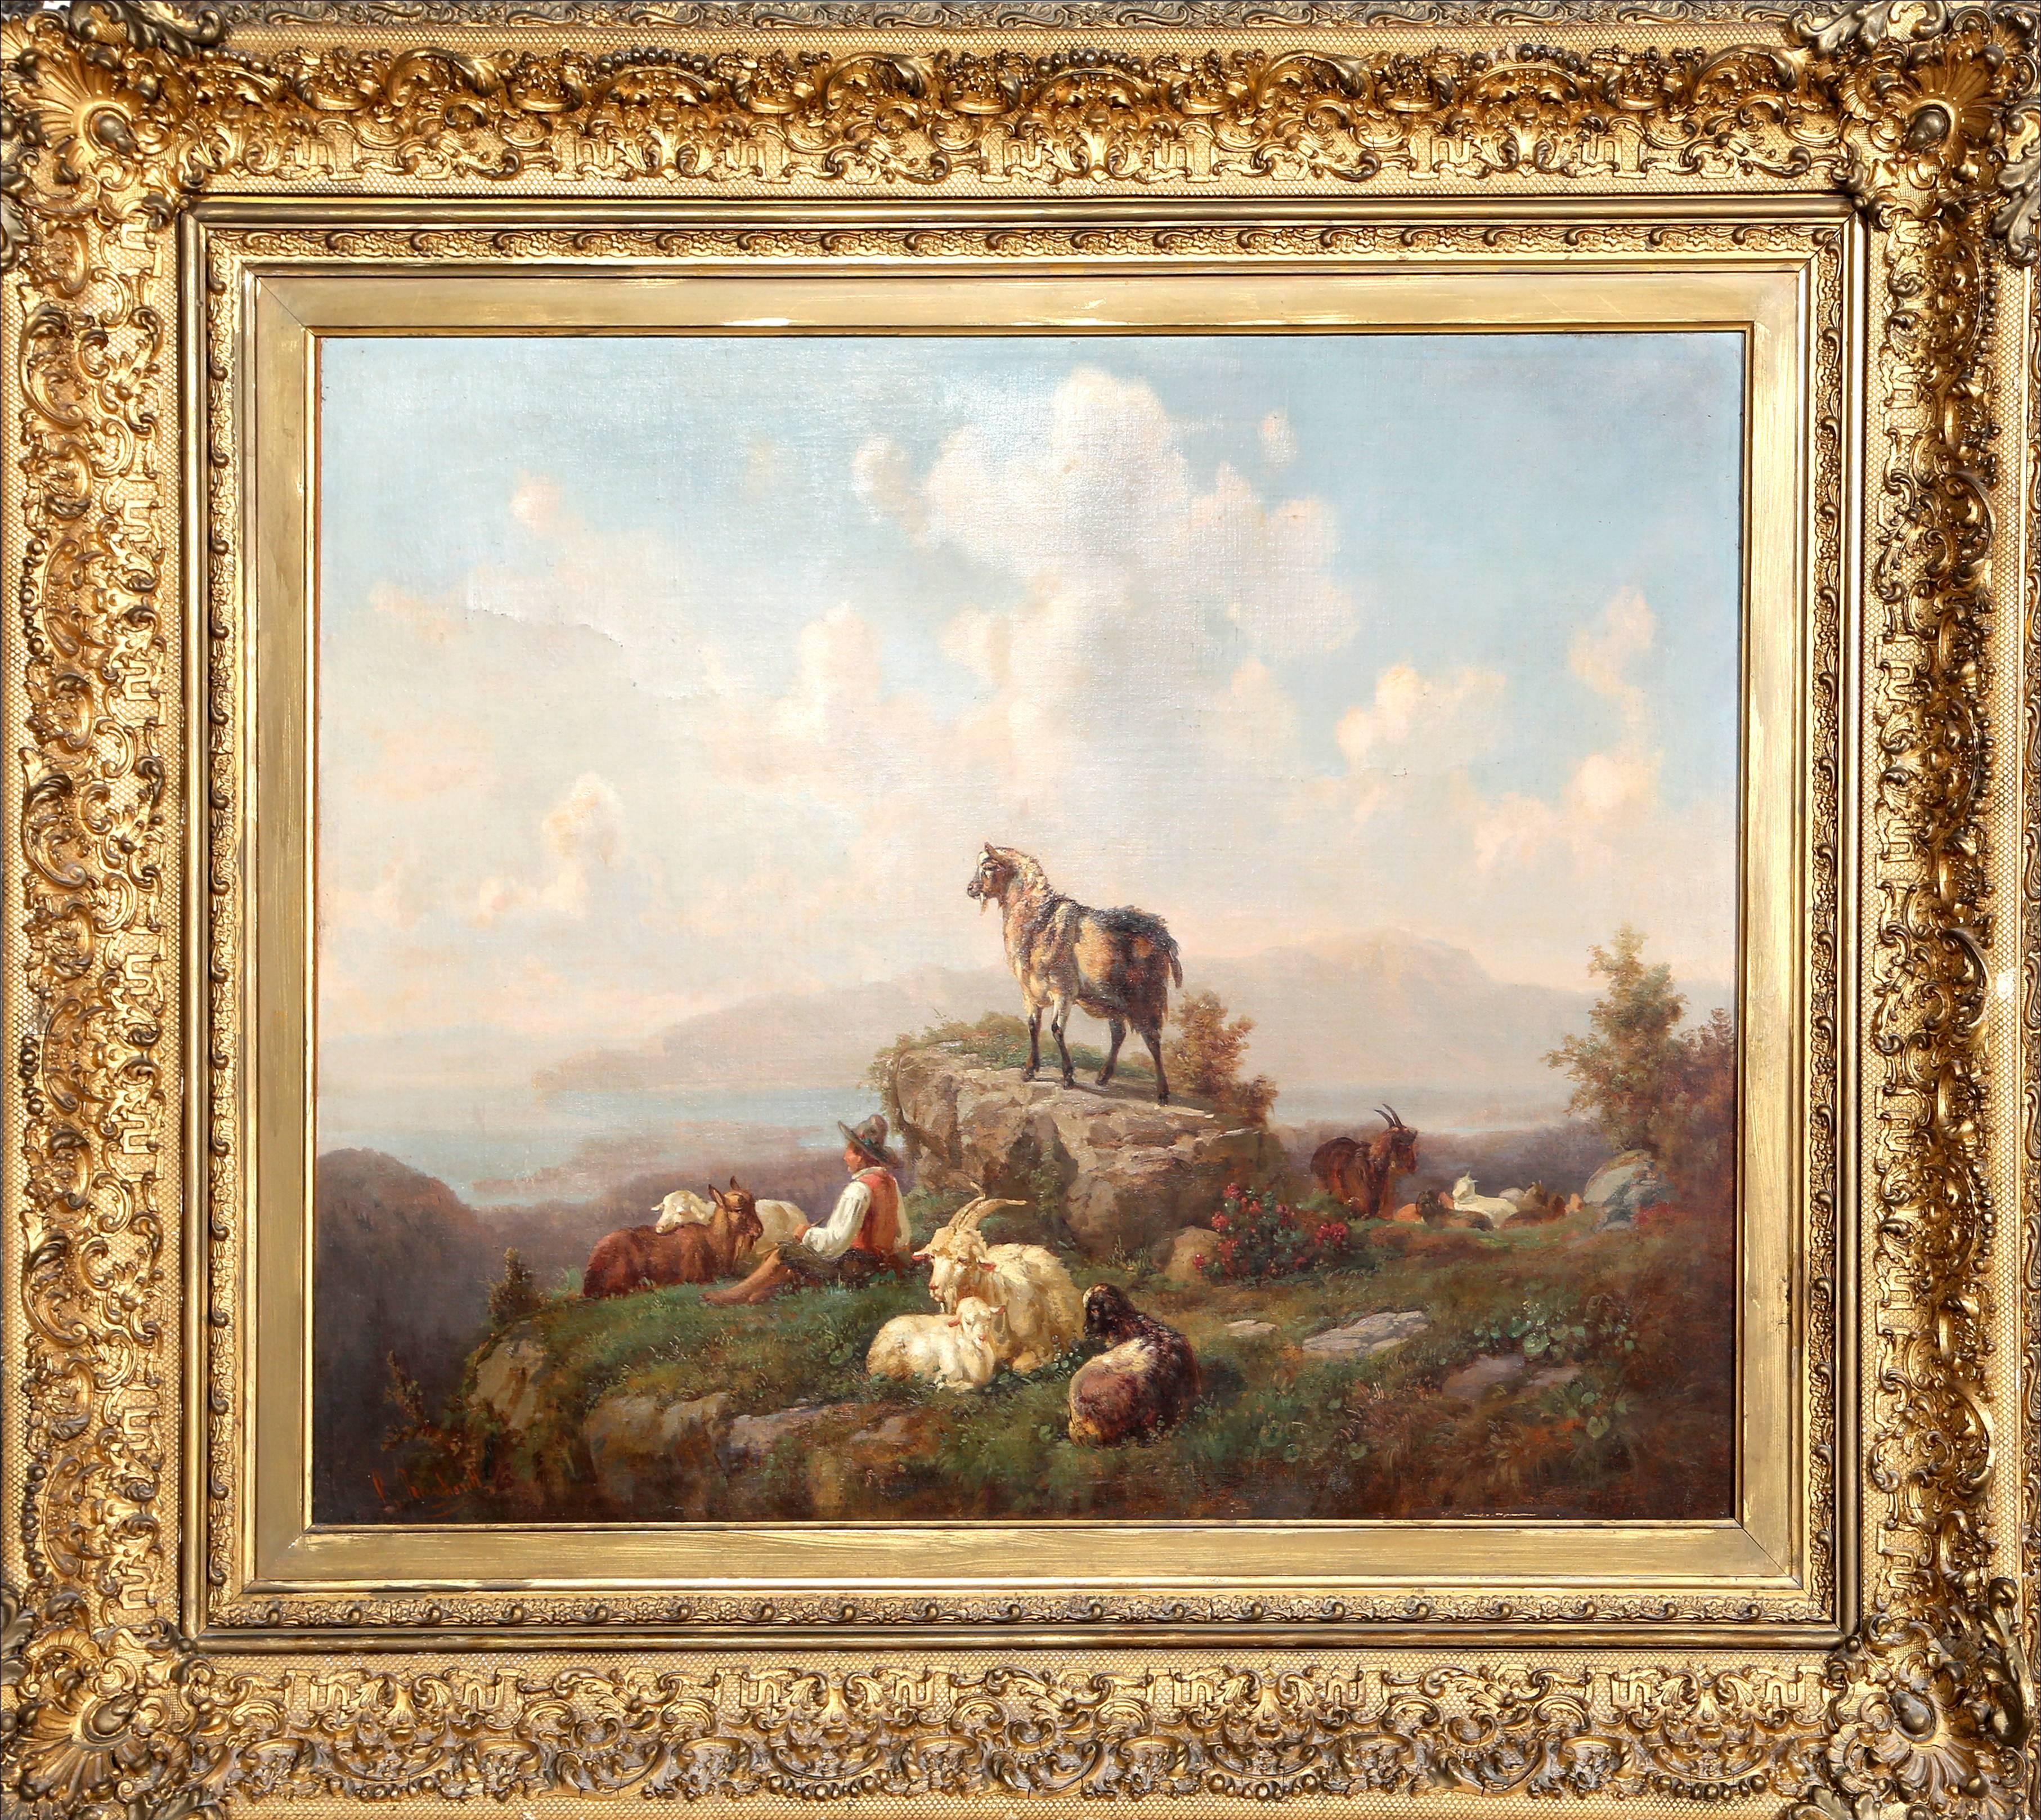 P. Reichardt Landscape Painting - Mountain Landscape with Goatherd and Goats